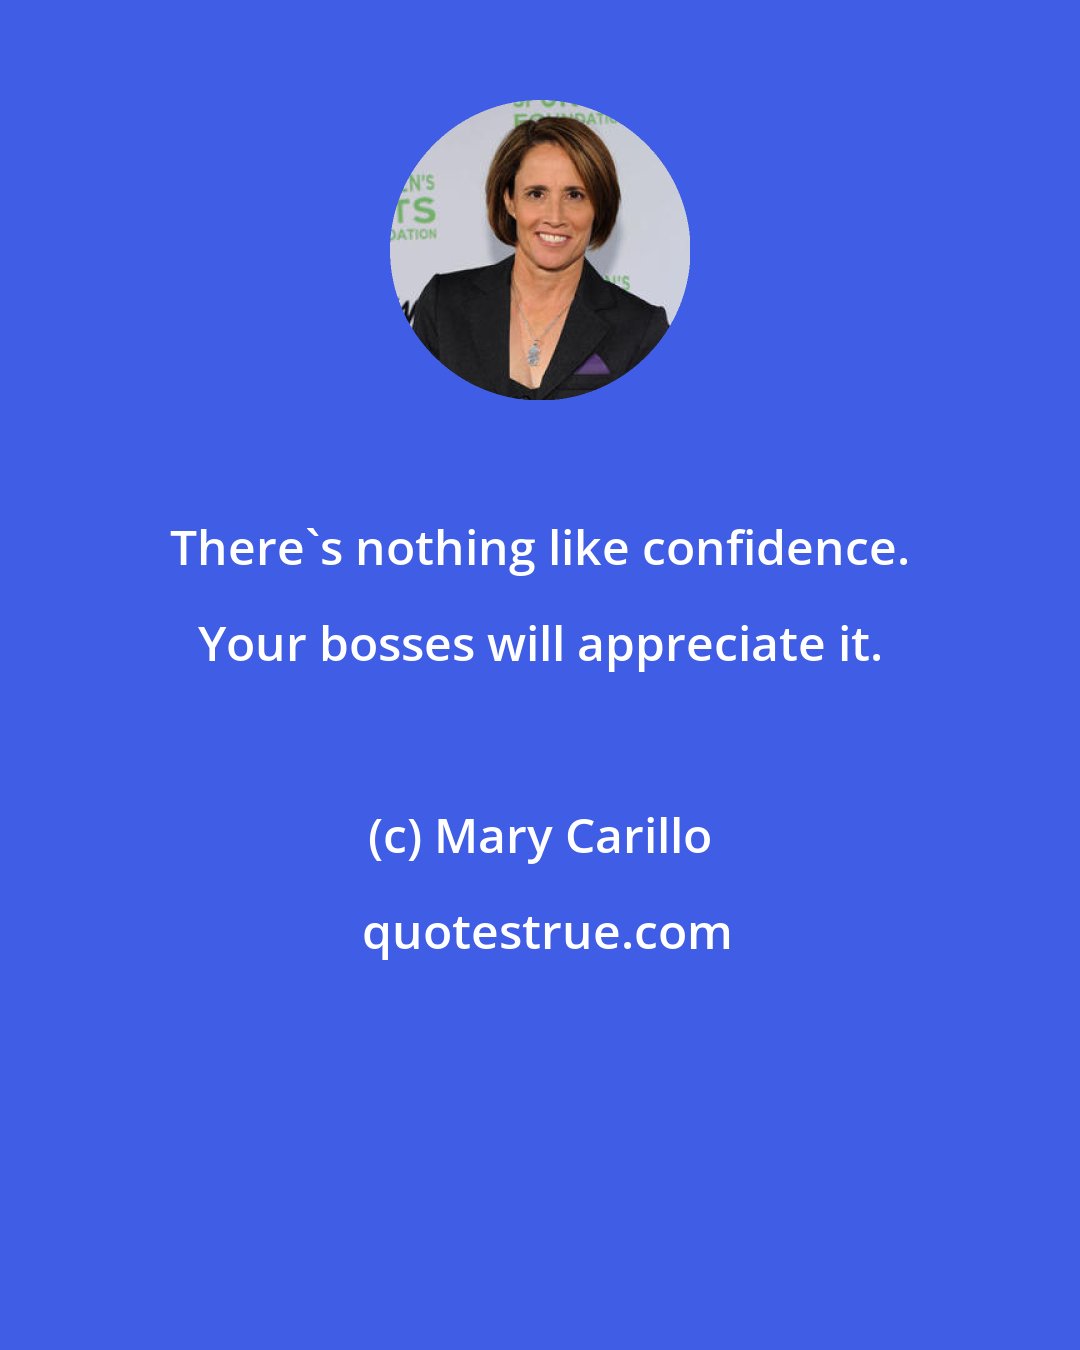 Mary Carillo: There's nothing like confidence. Your bosses will appreciate it.